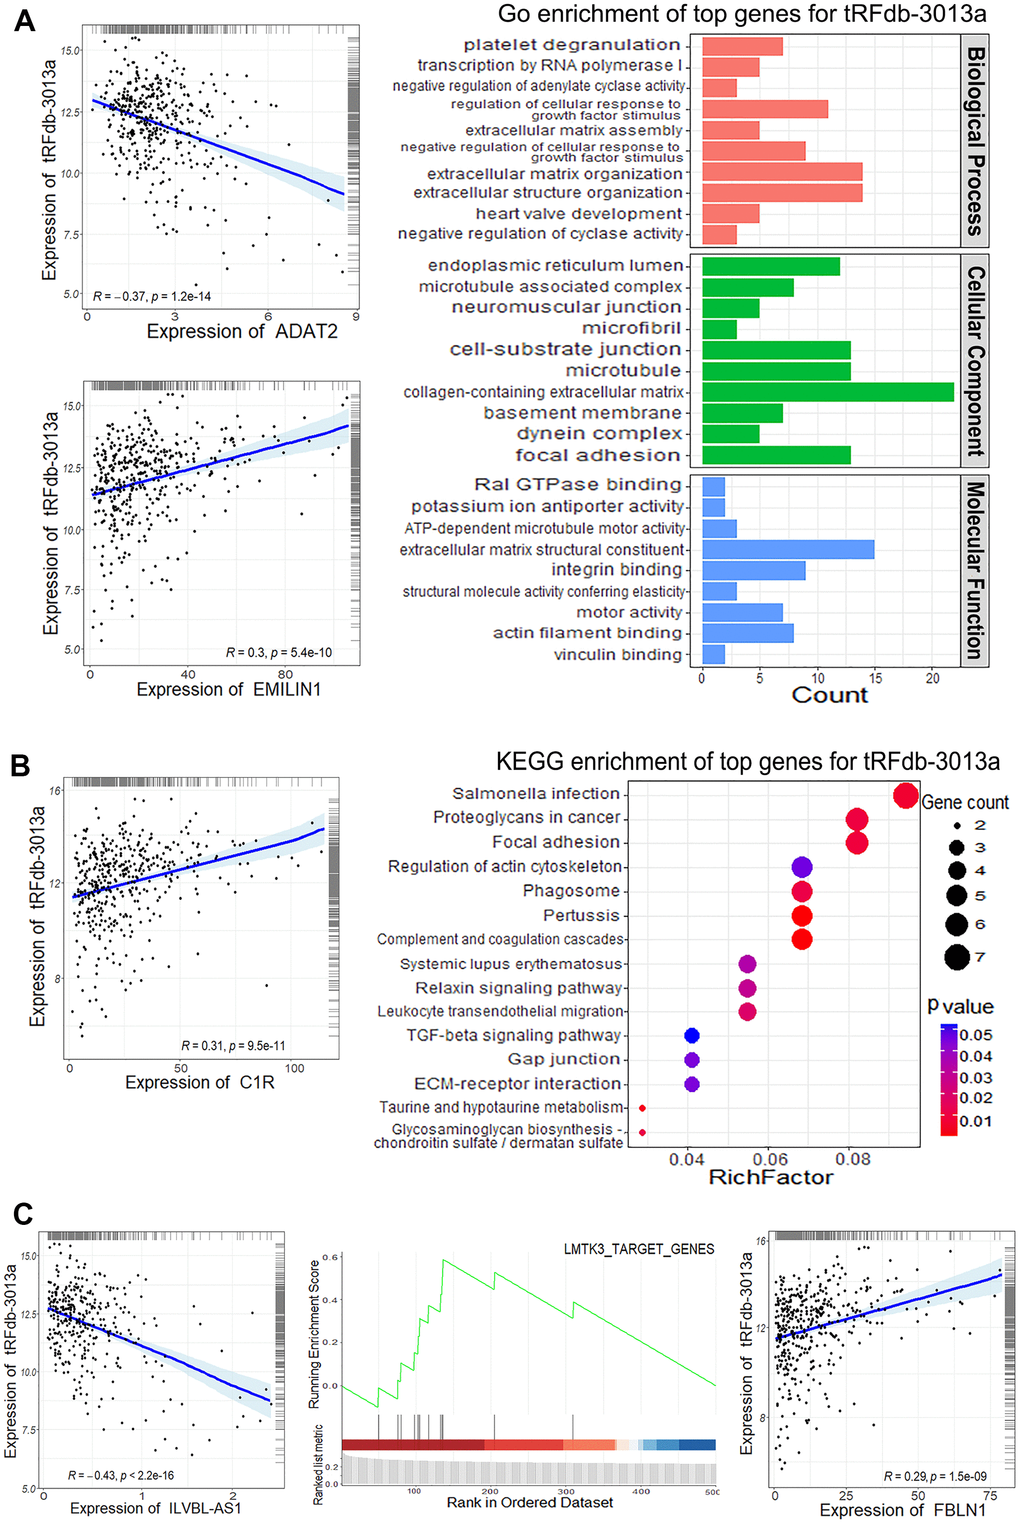 The enrichment analysis of tRFdb-3013a related-genes within TCGA-COAD data. (A) The top gene ontology (GO) terms, including biological process, cellular component and molecular function. (B) The top KEGG pathway for tRFdb-3013a related-genes. The correlation scatter-plots of tRFdb-3013a and its related-genes (ADAT2, EMILIN1, and C1R). (C) GSEA (gene set enrichment analysis) plots of the molecular signatures, the scatter plots for tRFdb-3013a and its related-genes (ILVBL-AS1, FBLN1).